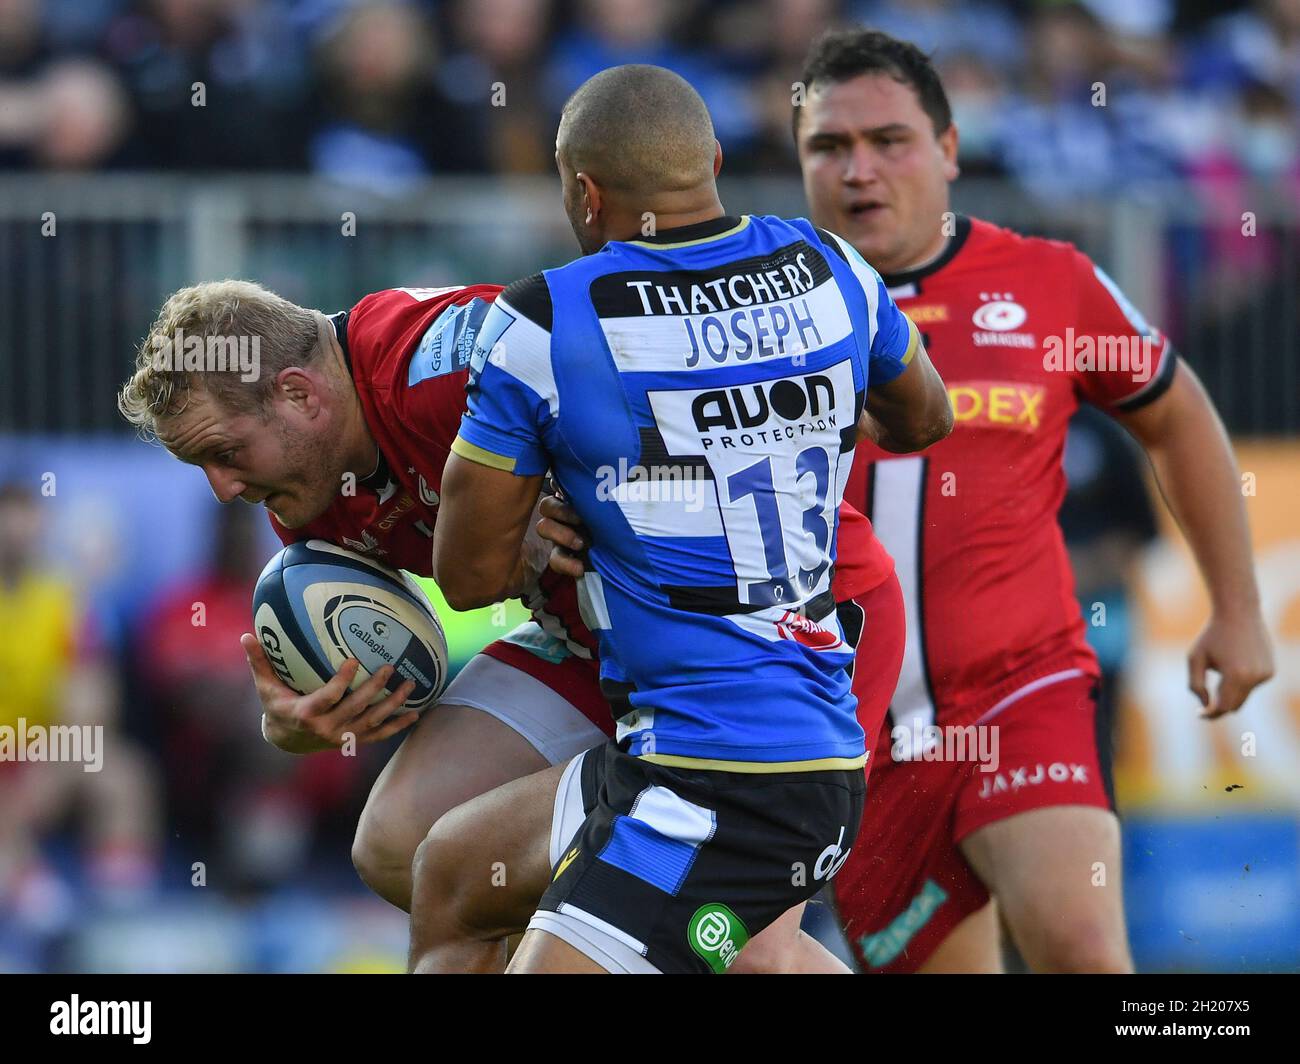 The Recreation Ground, Bath, England, UK. 17th October, 2021. Saracens' Vincent Koch is tackled by Bath Rugby's Jonathan Joseph during the Gallagher English Premiership match between Bath Rugby and Saracens: Credit: Ashley Western/Alamy Live News Stock Photo